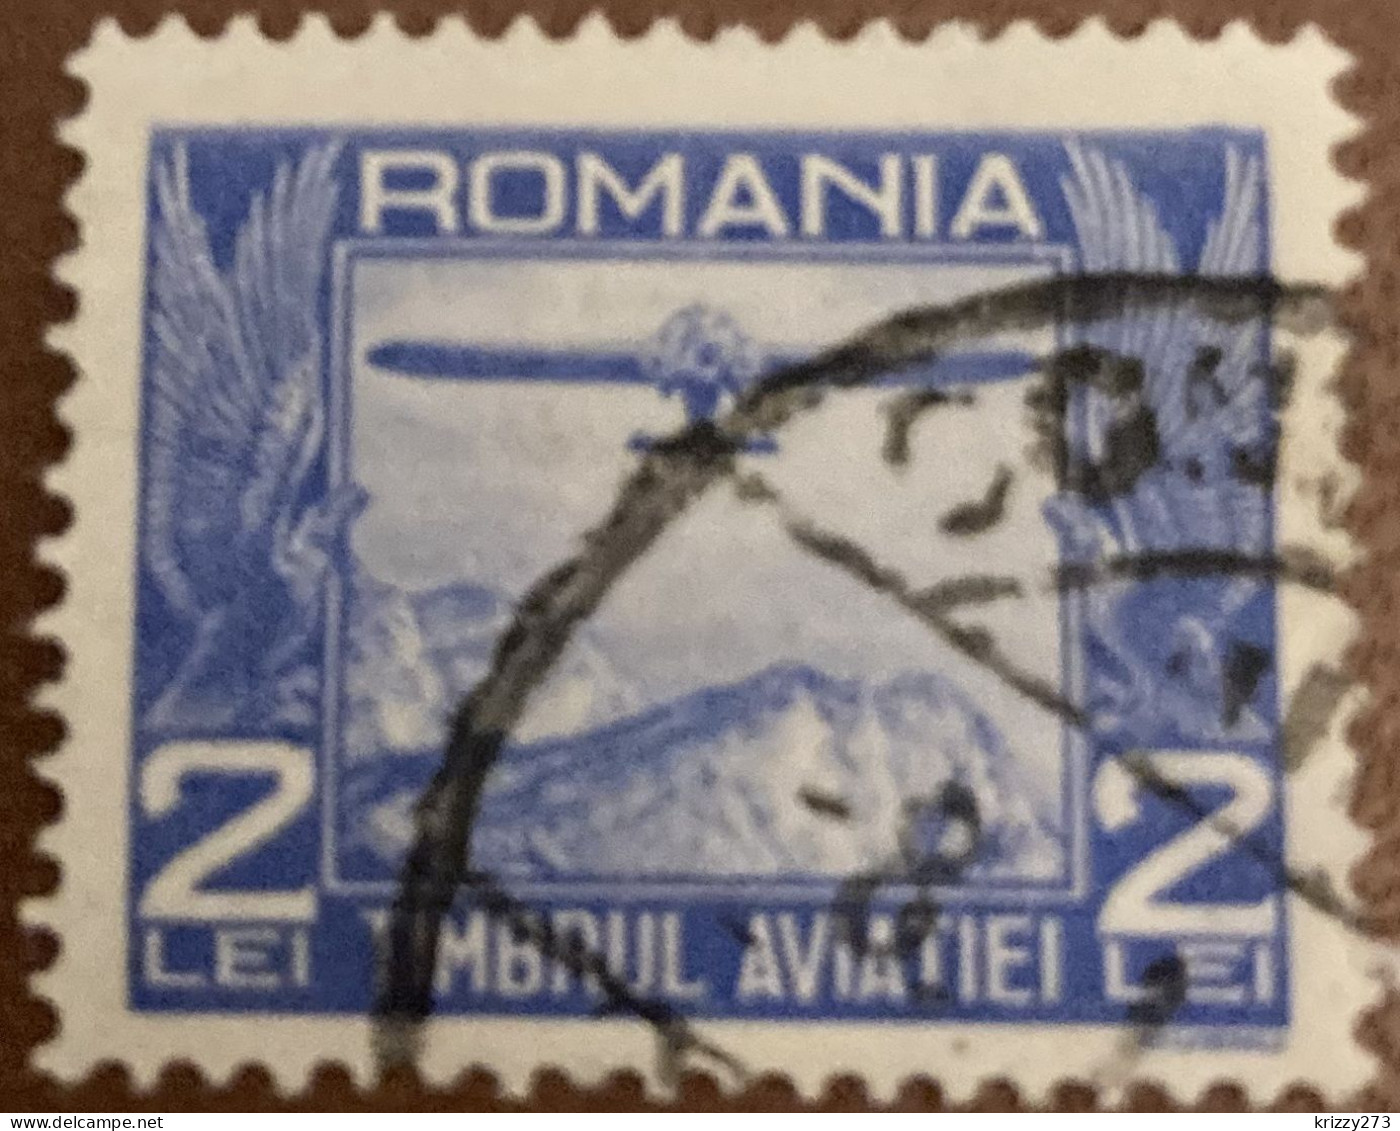 Romania 1931 National Fund Aviation 2L - Used - Revenue Stamps